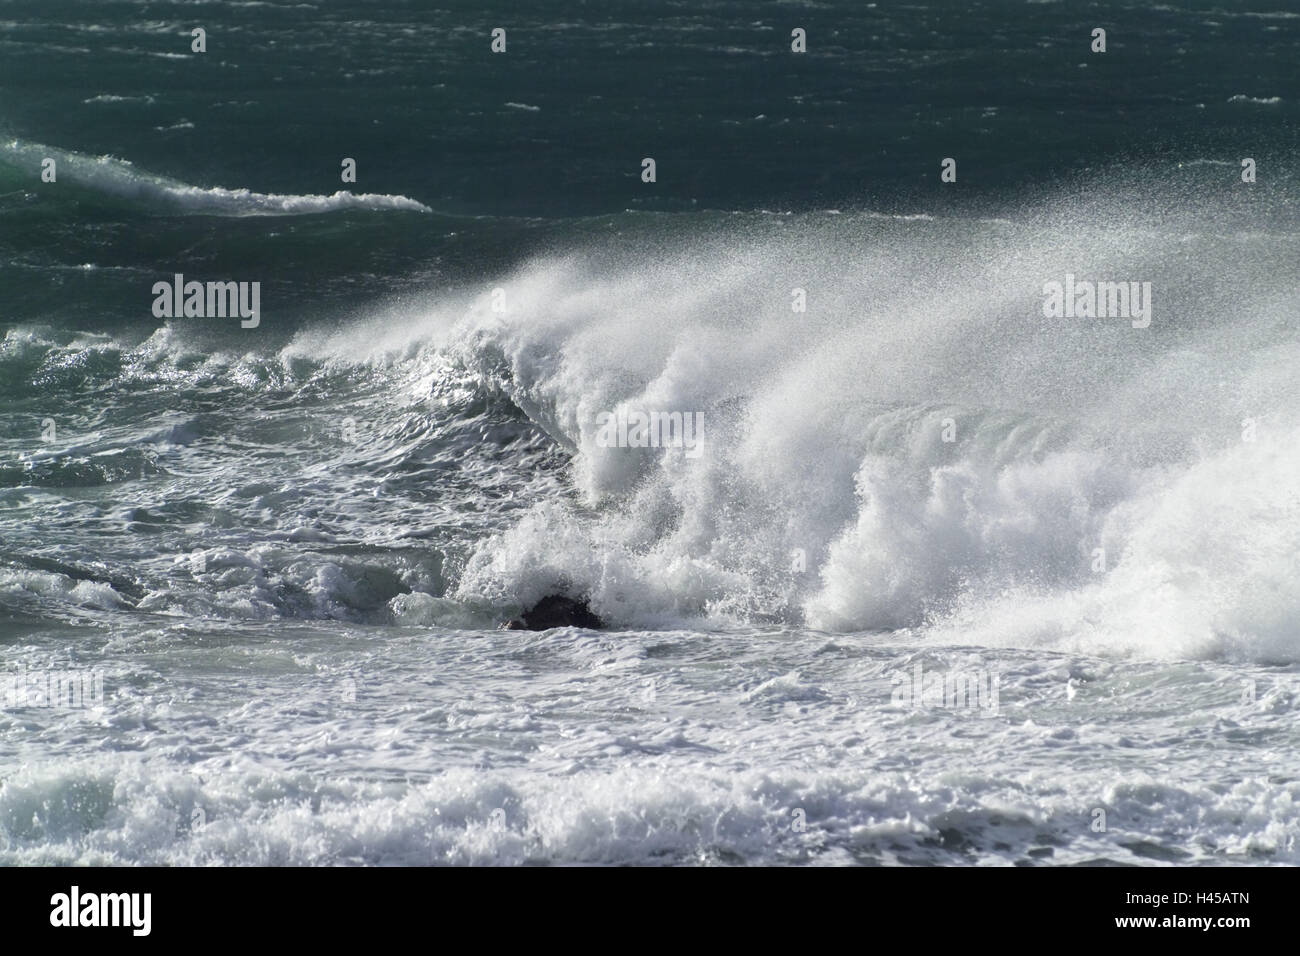 Mare, stormily, surf, Foto Stock